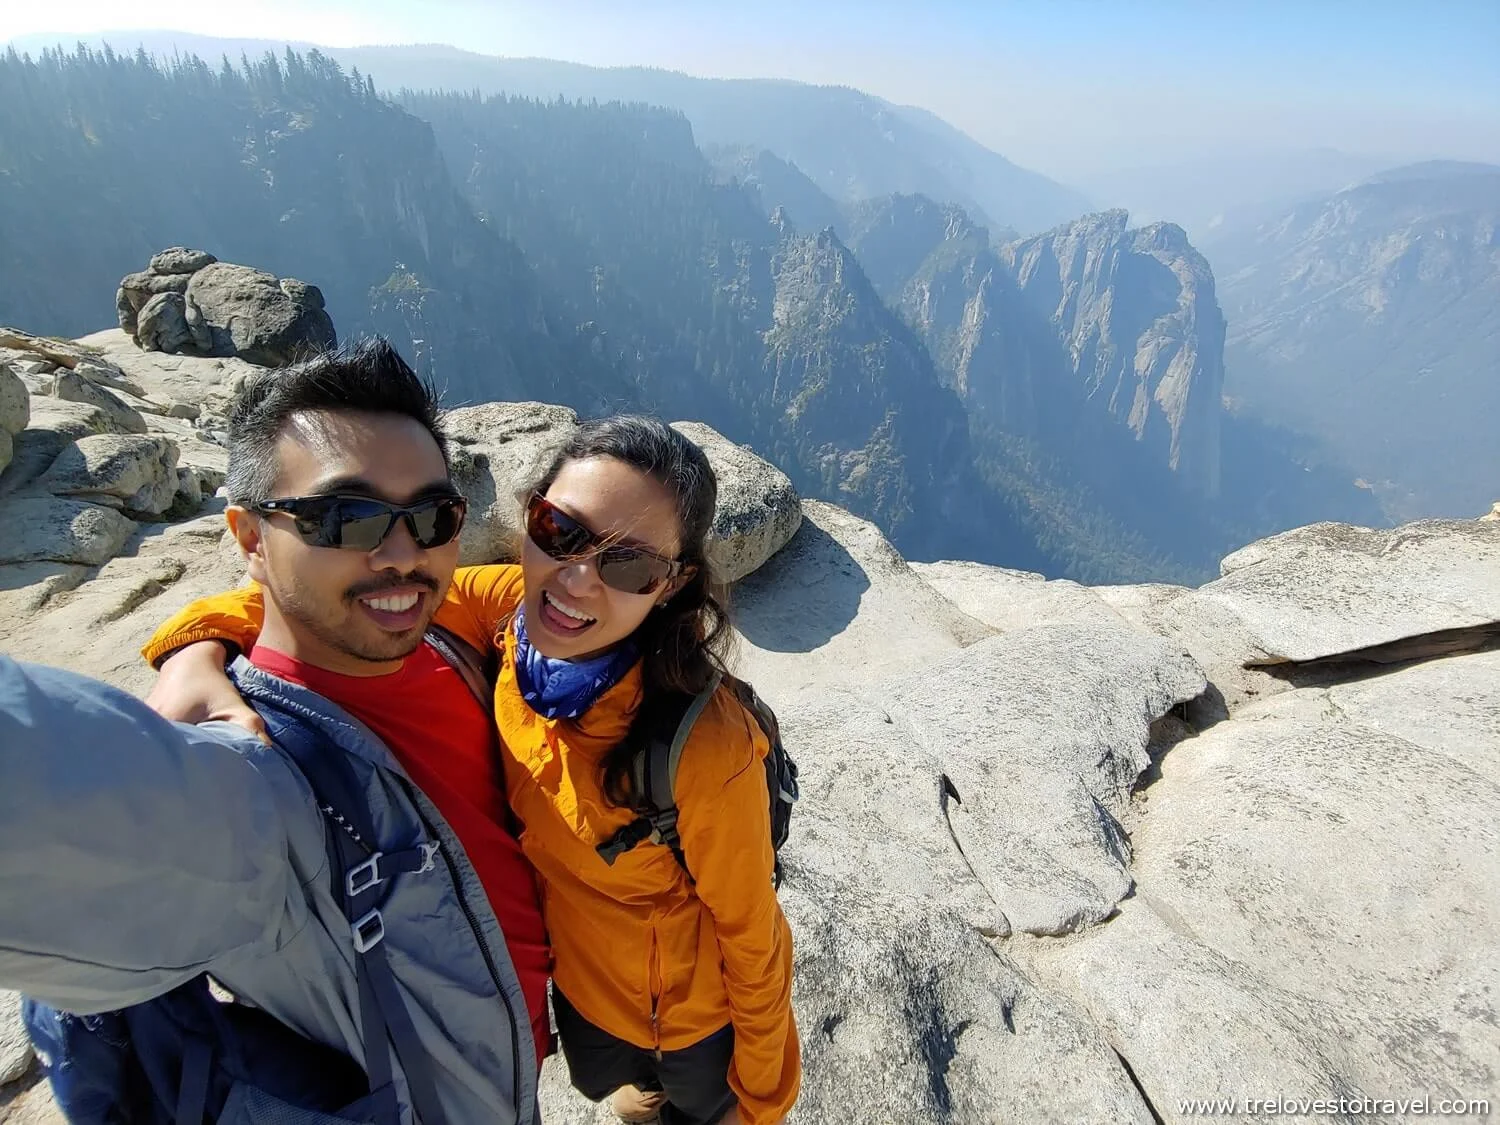 Easy Hikes in Yosemite National Park